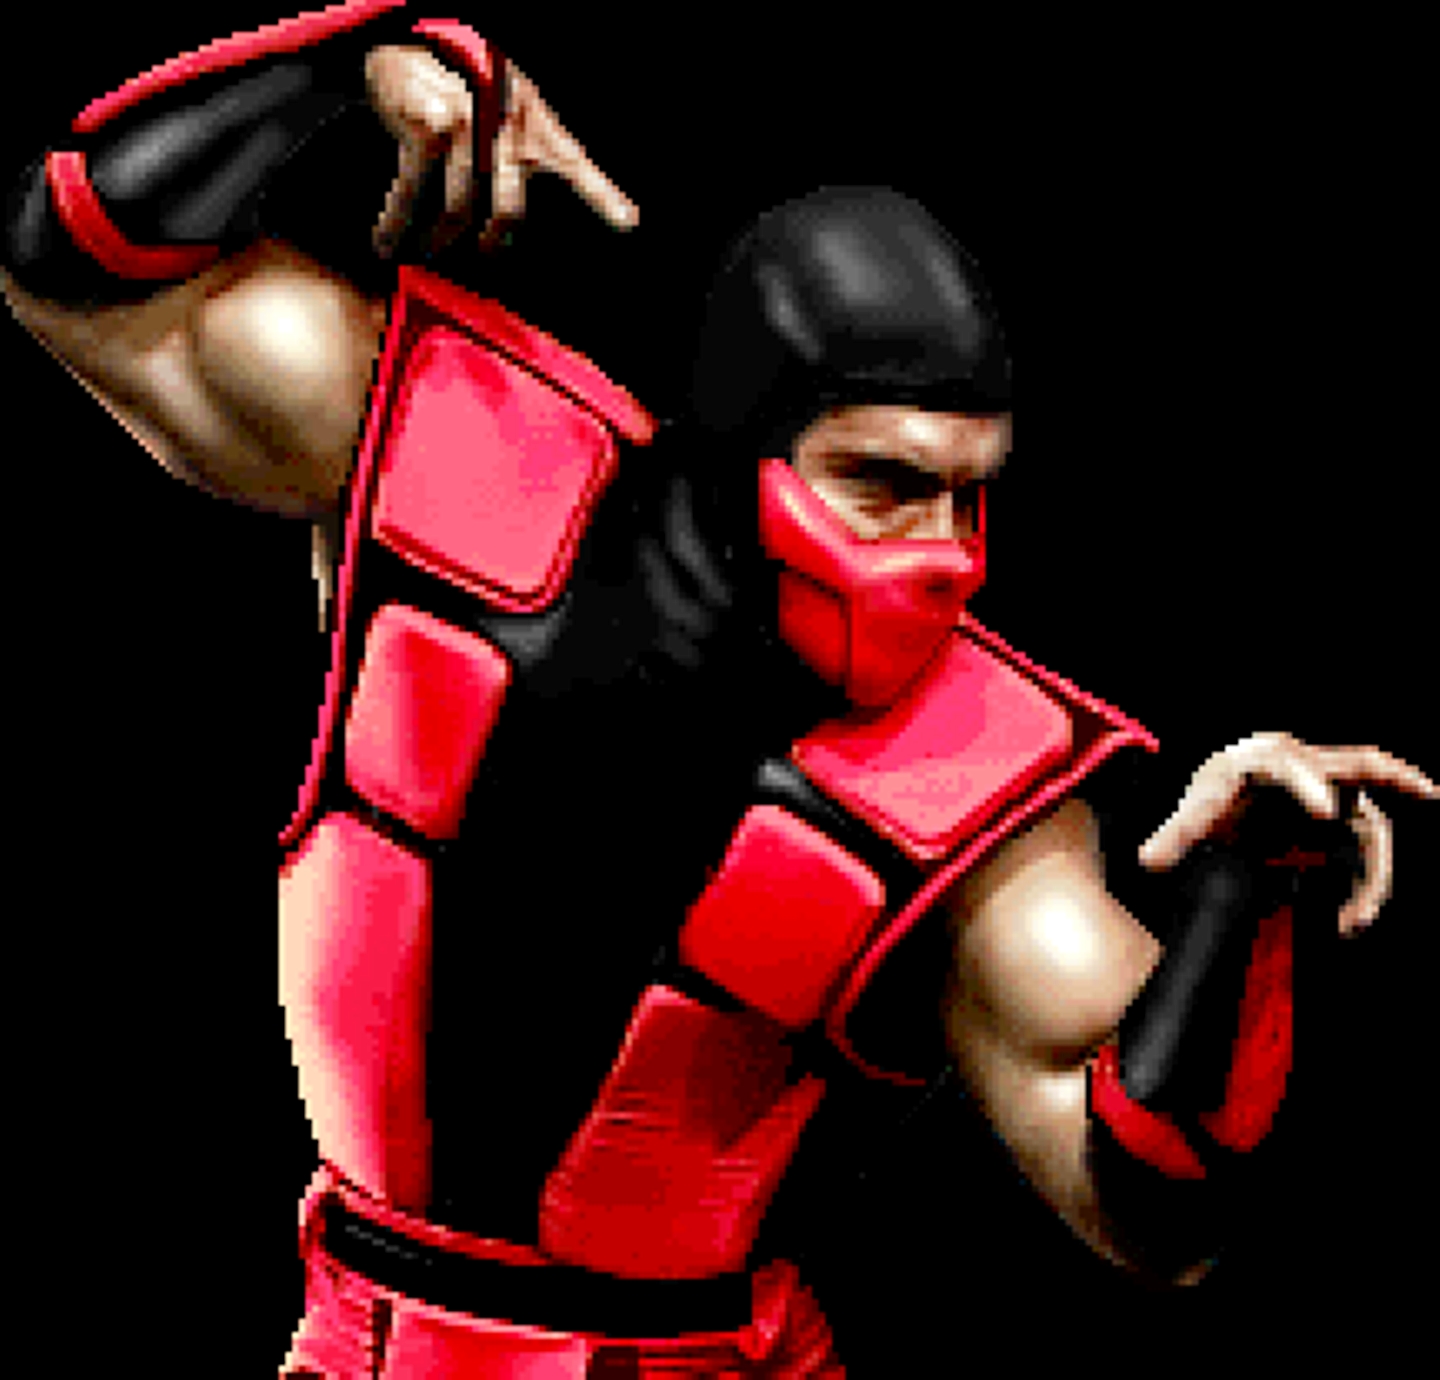 Ermac debuted in the franchise in Ultimate Mortal Kombat 3, released in 1995 for the Super Nintendo and arcades.